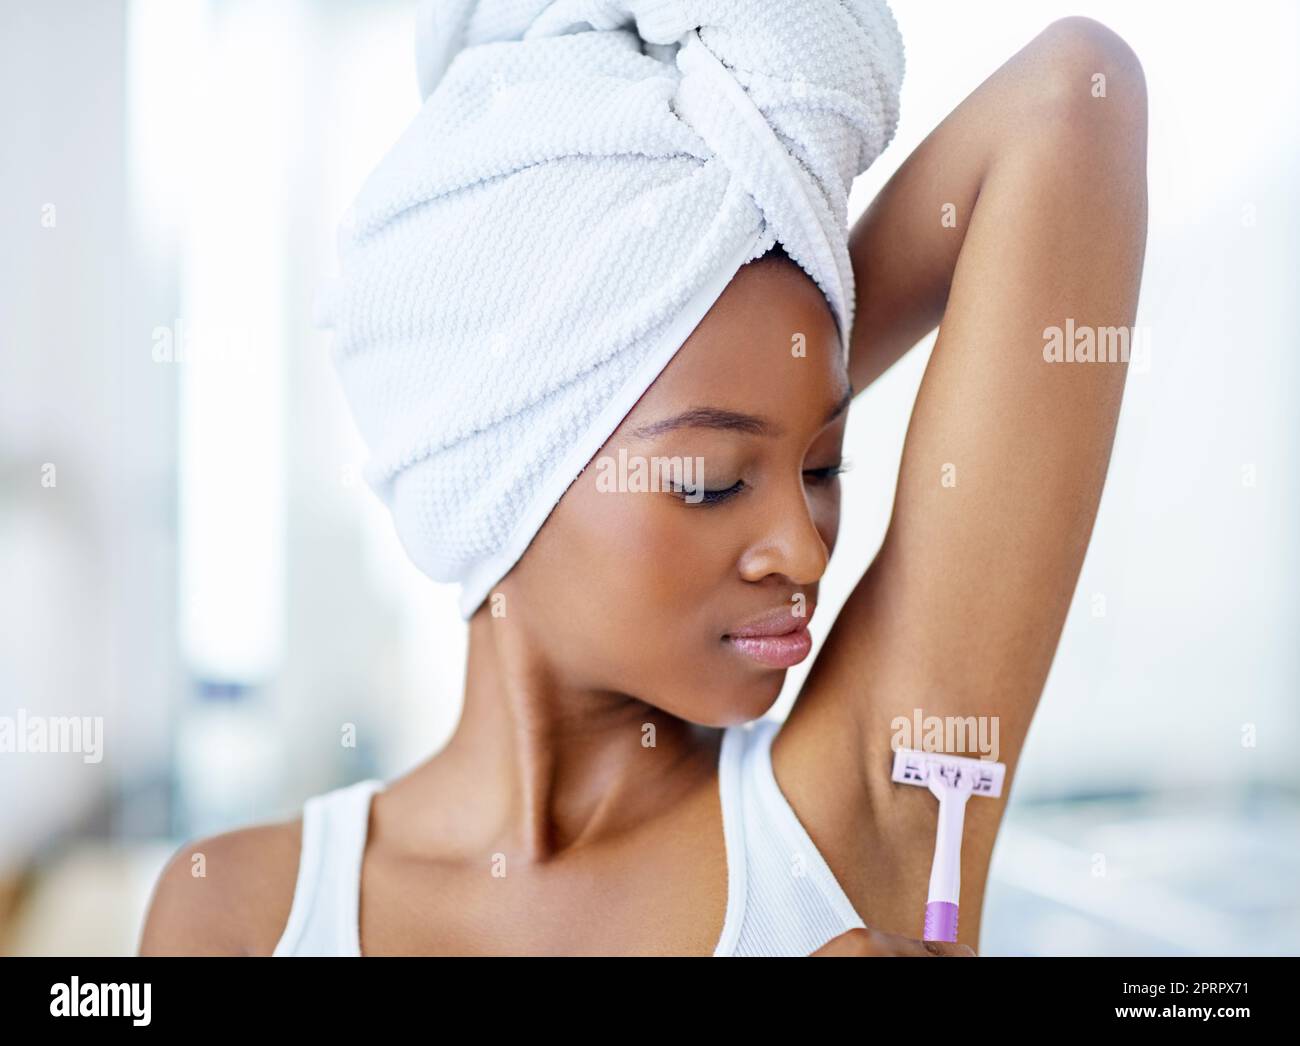 The closest shave by far. a beautiful young woman during her daily beauty routine. Stock Photo